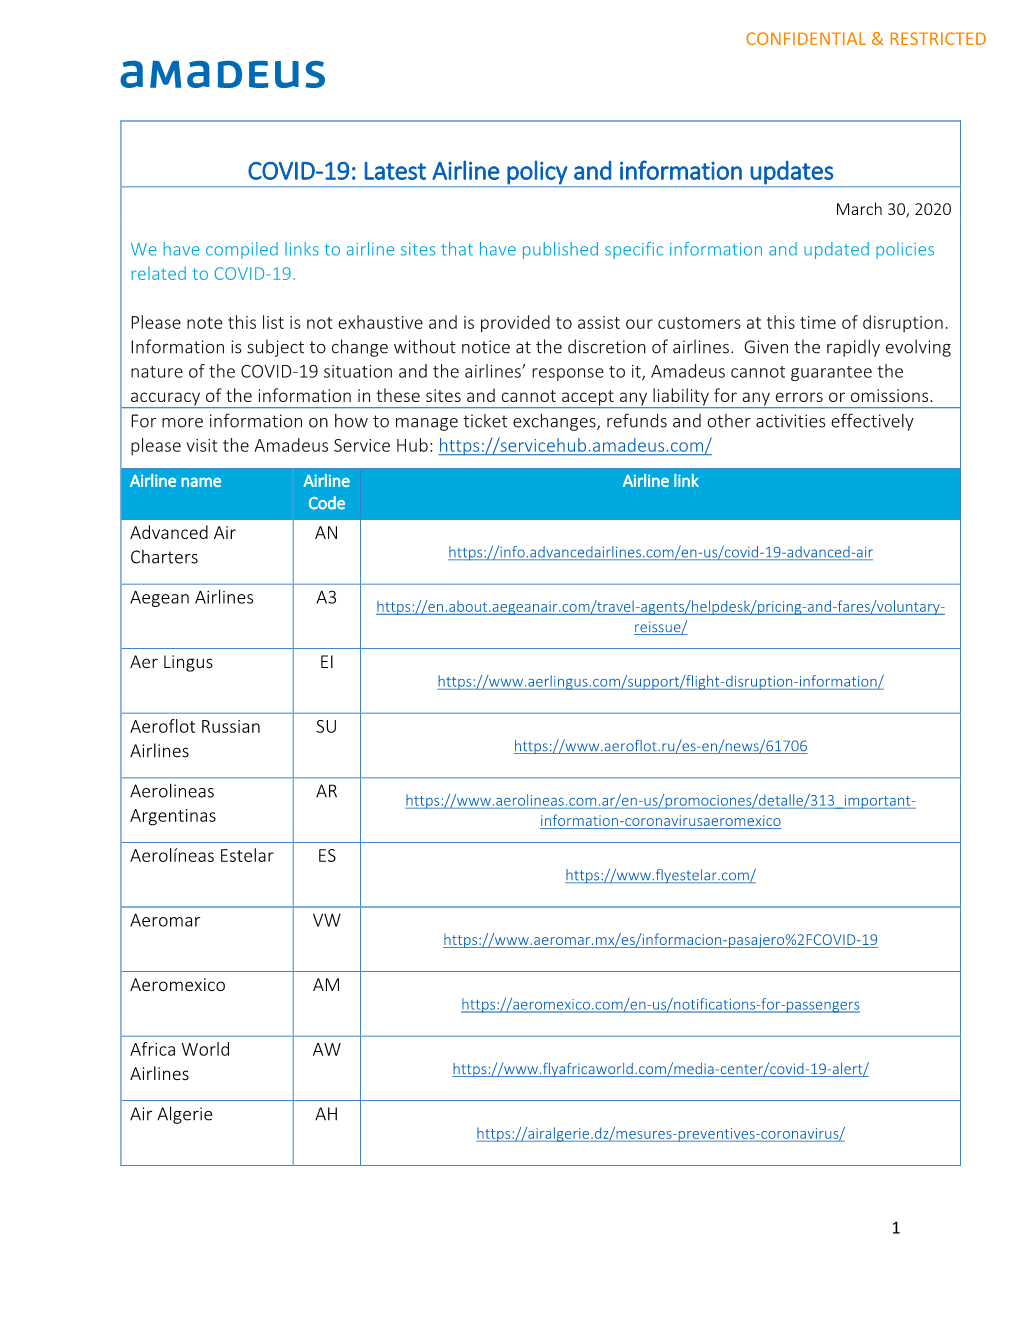 COVID-19: Latest Airline Policy and Information Updates March 30, 2020